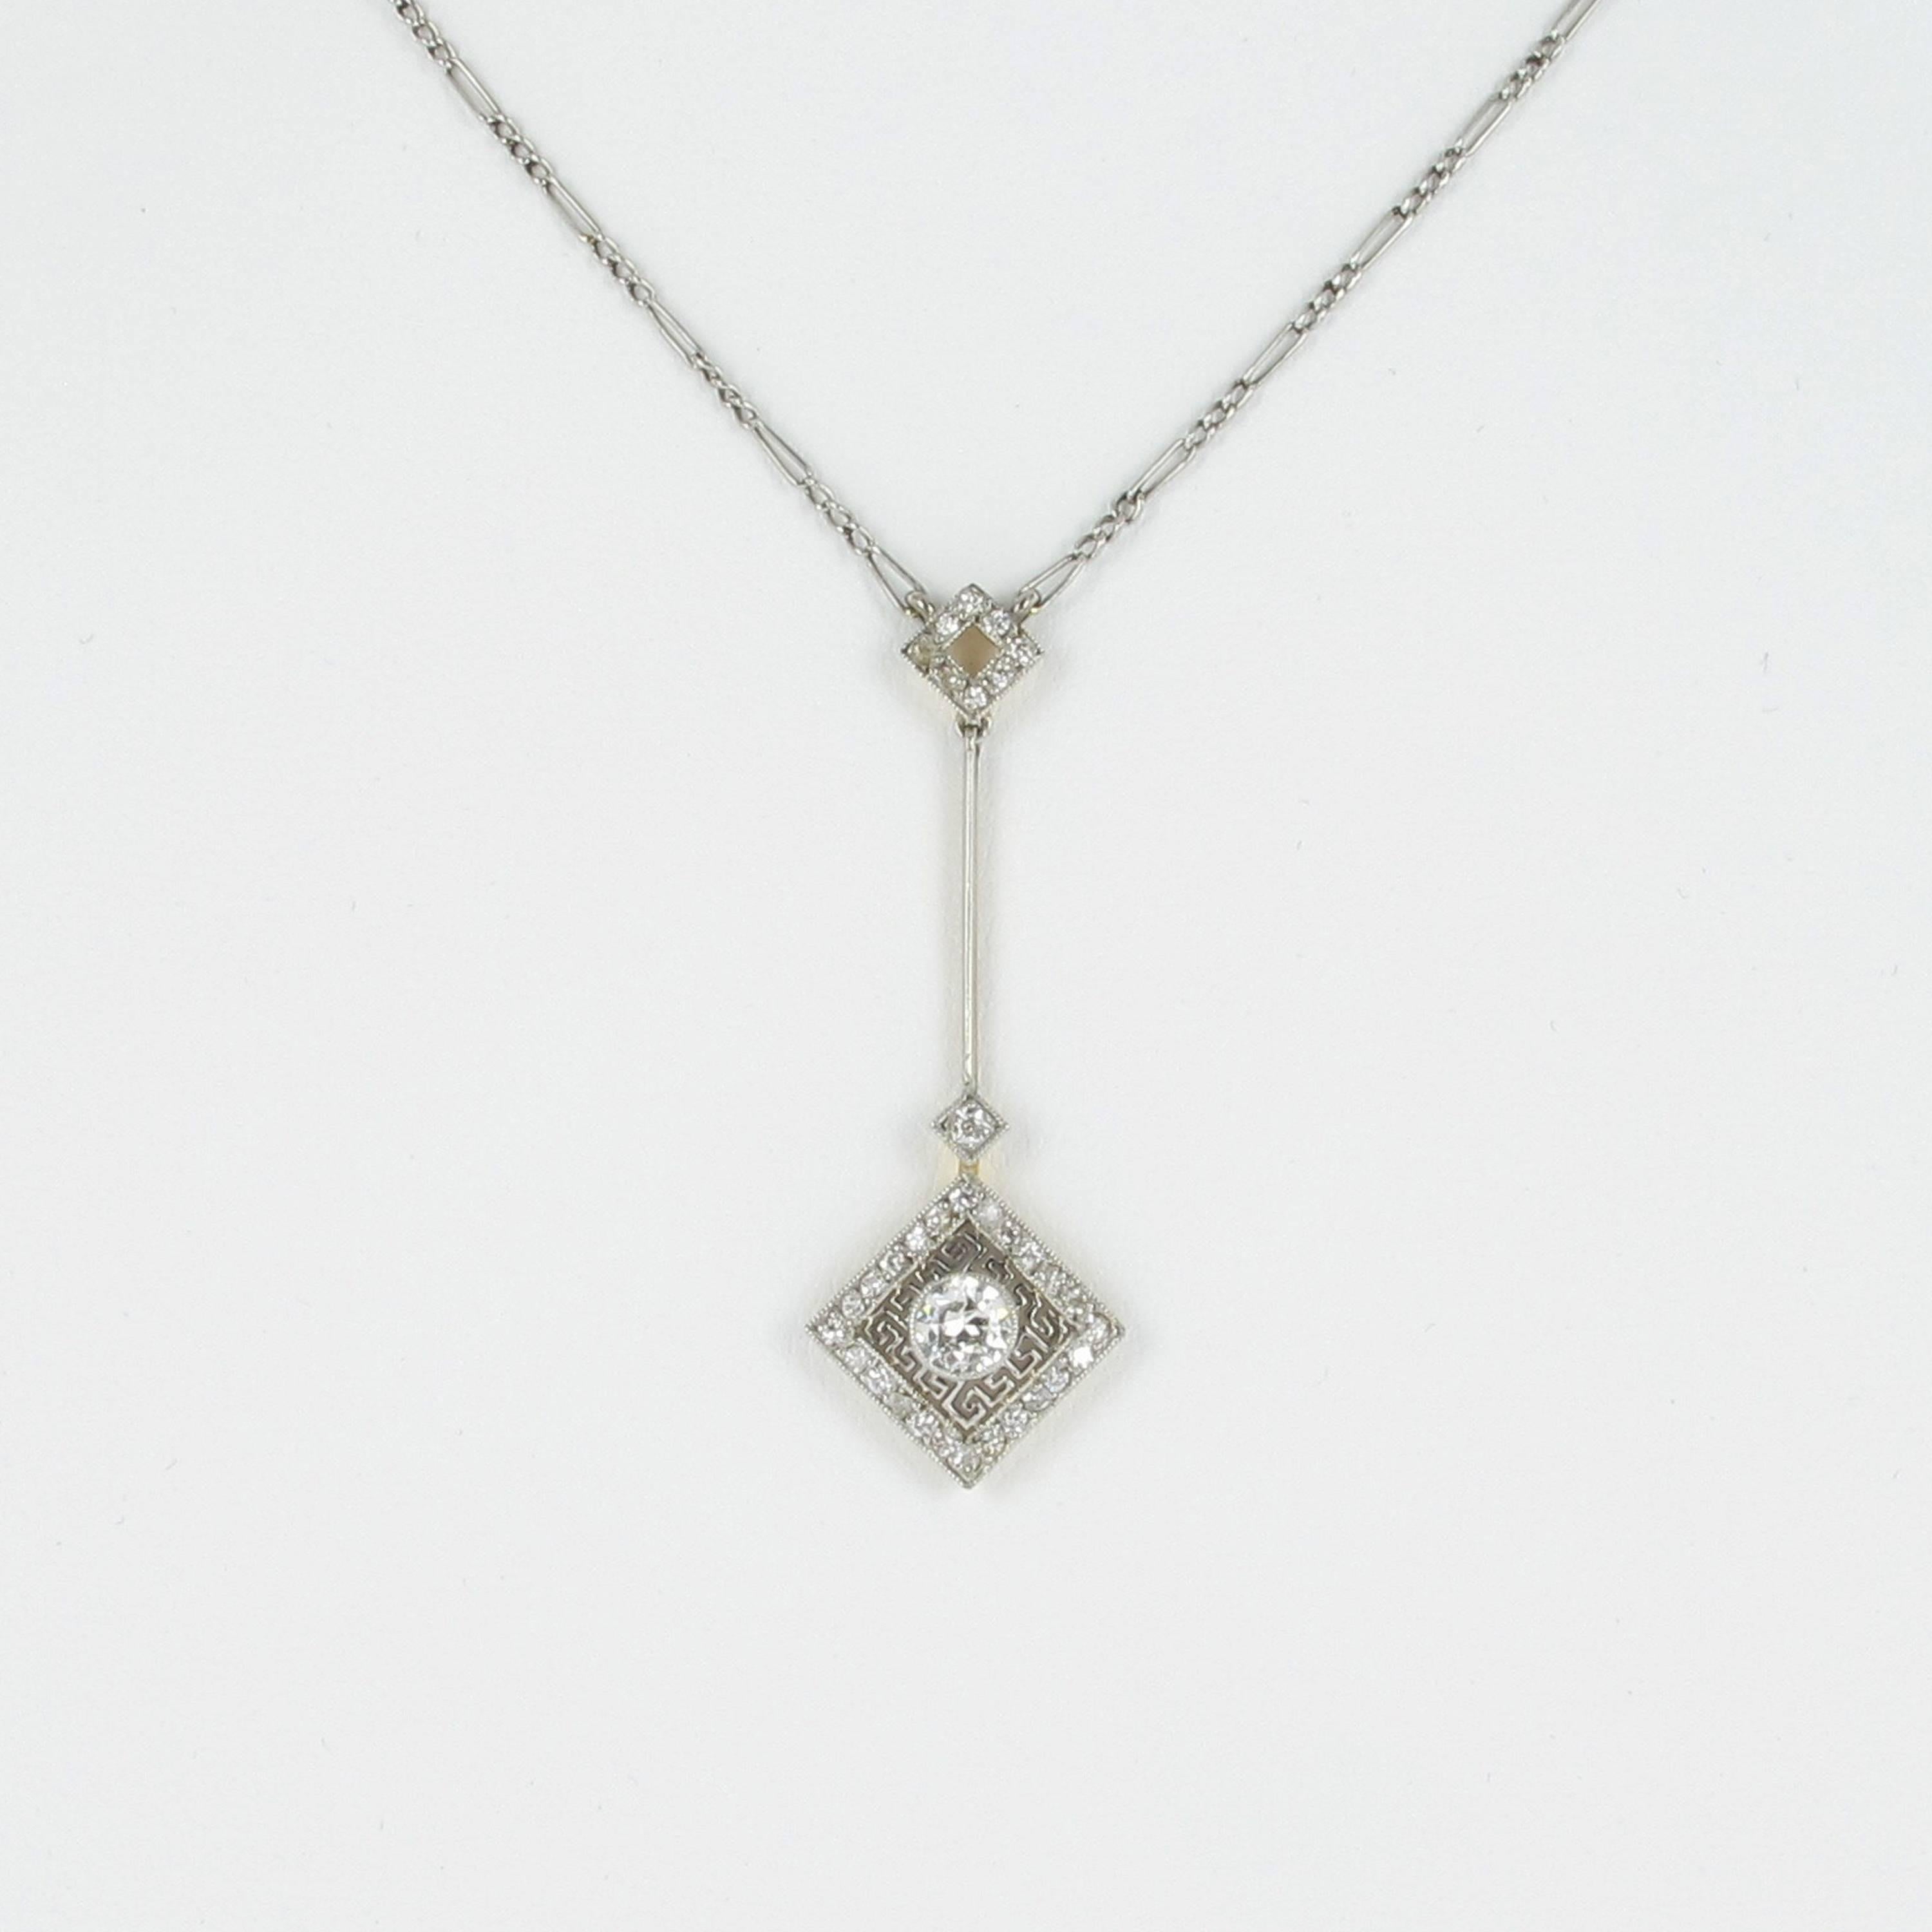 Edwardian diamond lavalière necklace in platinum 950 and yellow gold 750. Three square shaped parts all set with diamonds. The main old cut diamond weighs approx. 0.35 ct, additional rose cuts of approx. 0.30 ct. Millegriffe settings and very fine